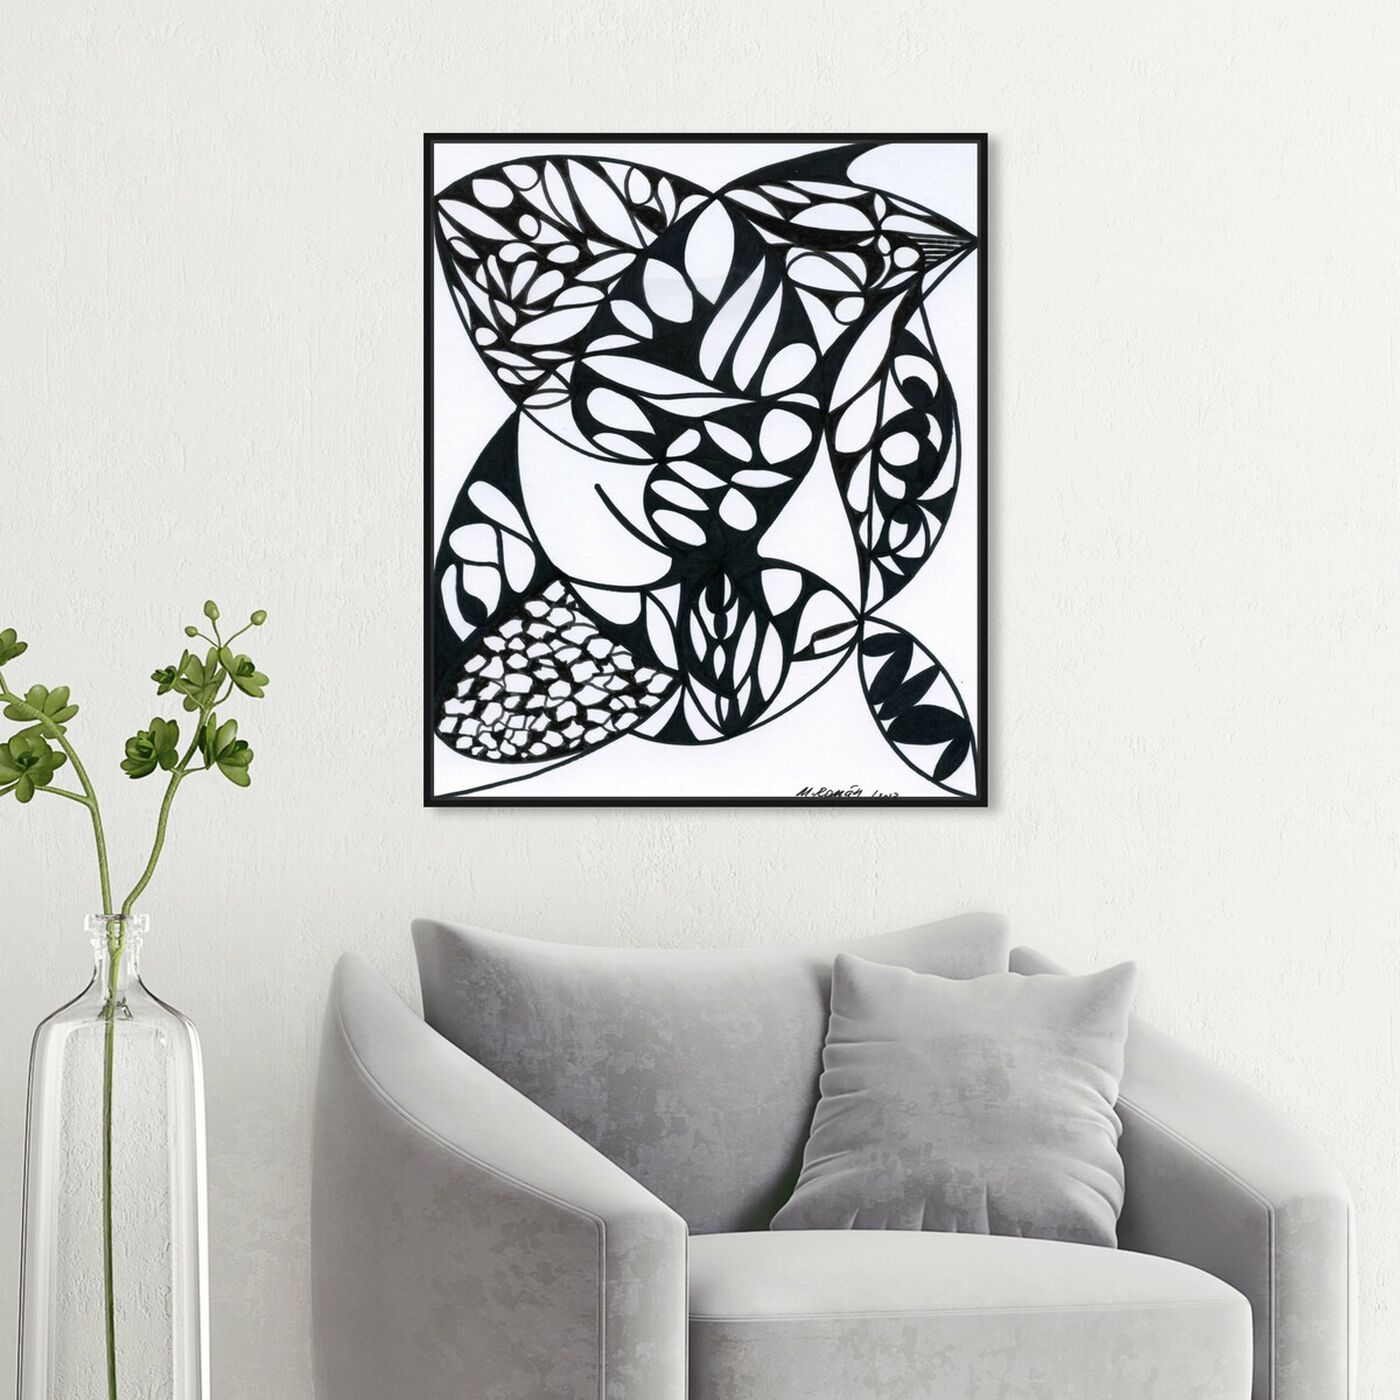 Hanging view of Nocturne featuring abstract and geometric art.